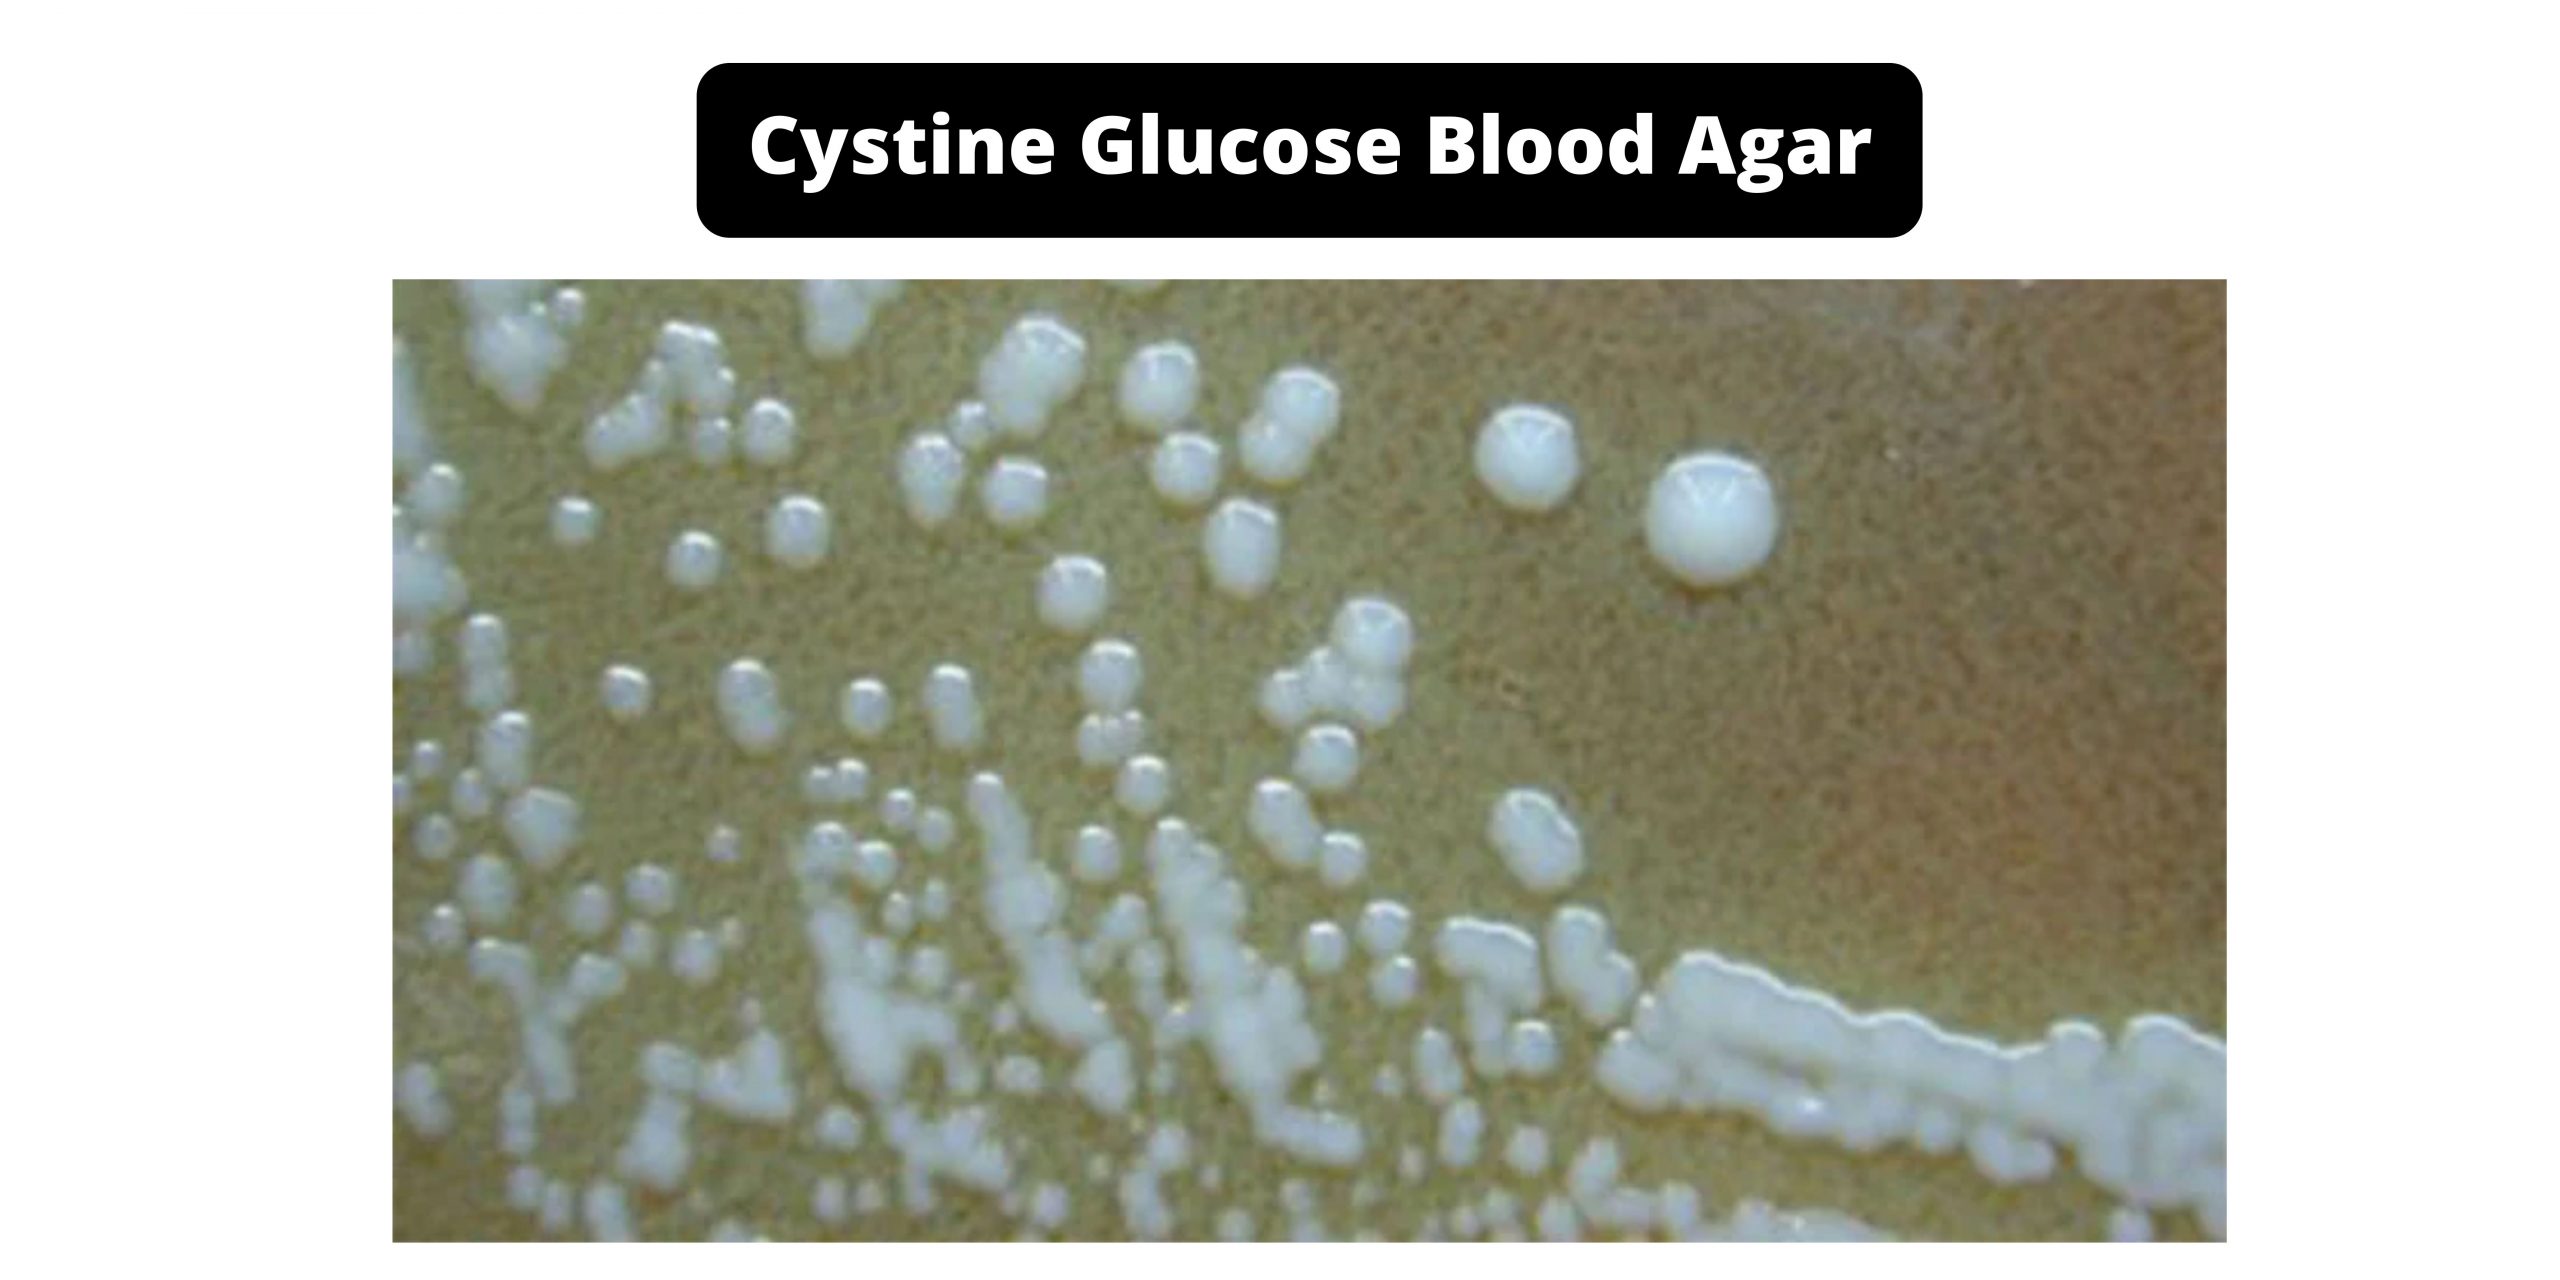 Cystine Glucose Blood Agar Composition, Principle, Preparation, Results, Uses